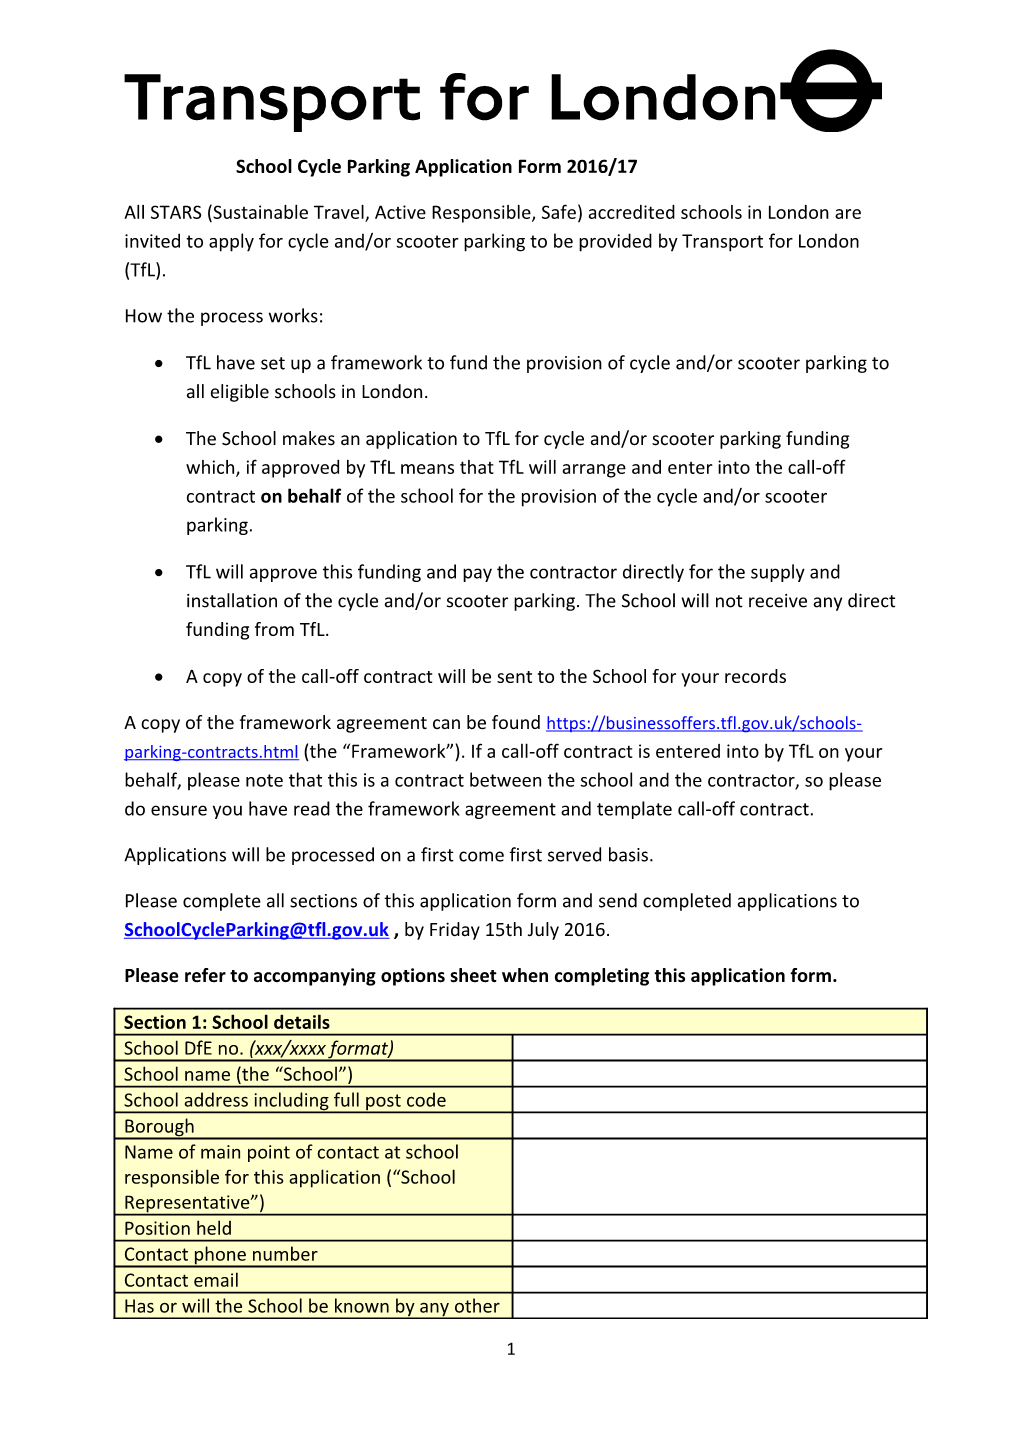 School Cycle Parking Application Form 2016/17